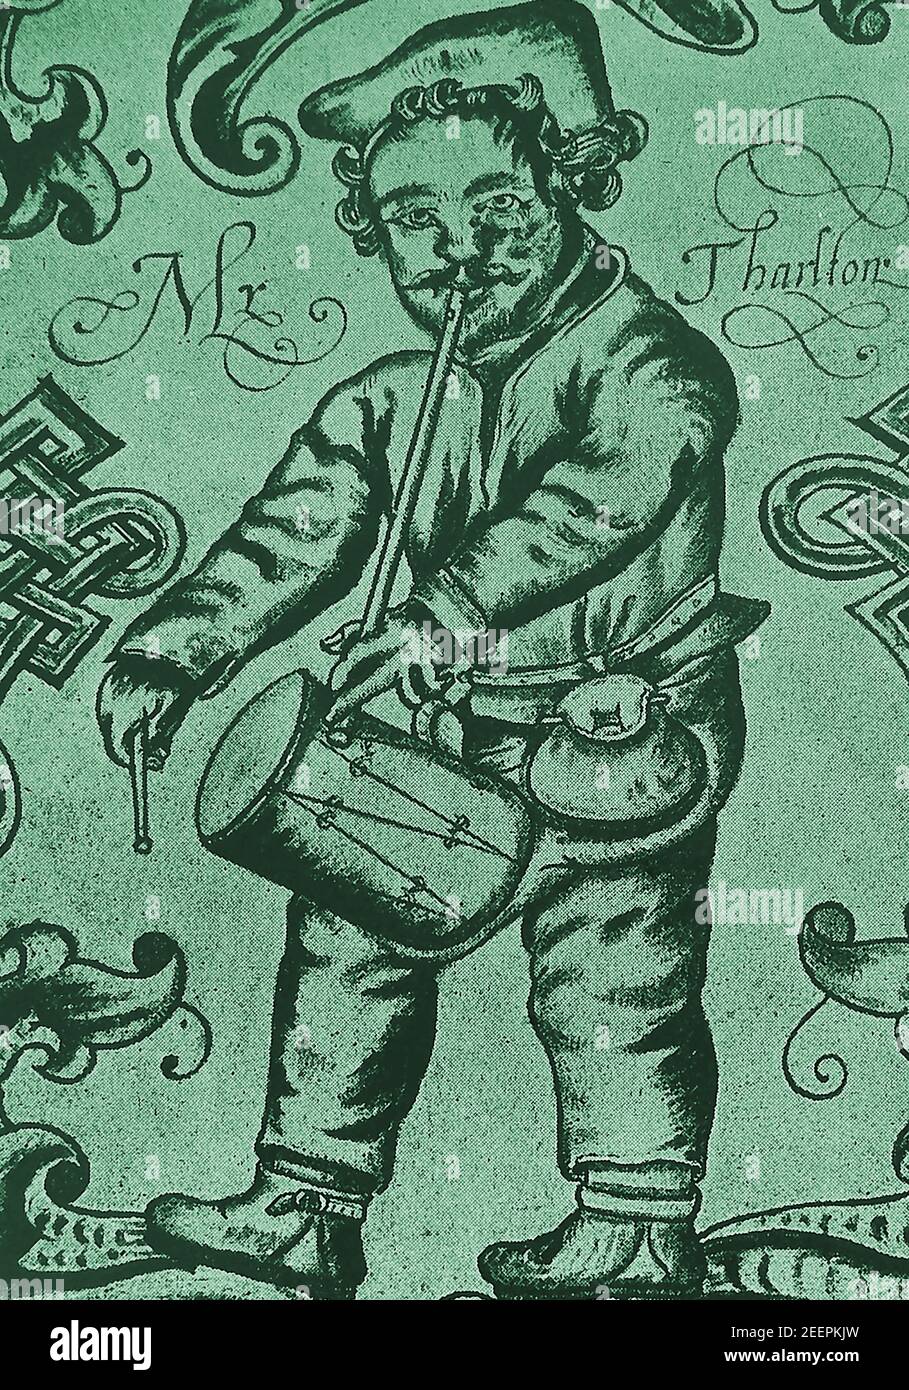 An old illustrative portrait of Richard Tarlton (tarelton or Tharlton)  circa 1540 -1588 who was one of the most famous all-round musical comedians, playwrights, singers, dancers and writers  of his time (Elizabethan period). He is seen here with his pipe, tabour and drum.  By 1583,  he is mentioned as one of the original members of the Queen's Men (Queen Elizabeths retained entertainers),often playing at the Curtain Theatre. He was known for improvising doggerel on subjects suggested by his audience, so much so that improvised doggerel  or rhymrs became known as Tarltons. Stock Photo